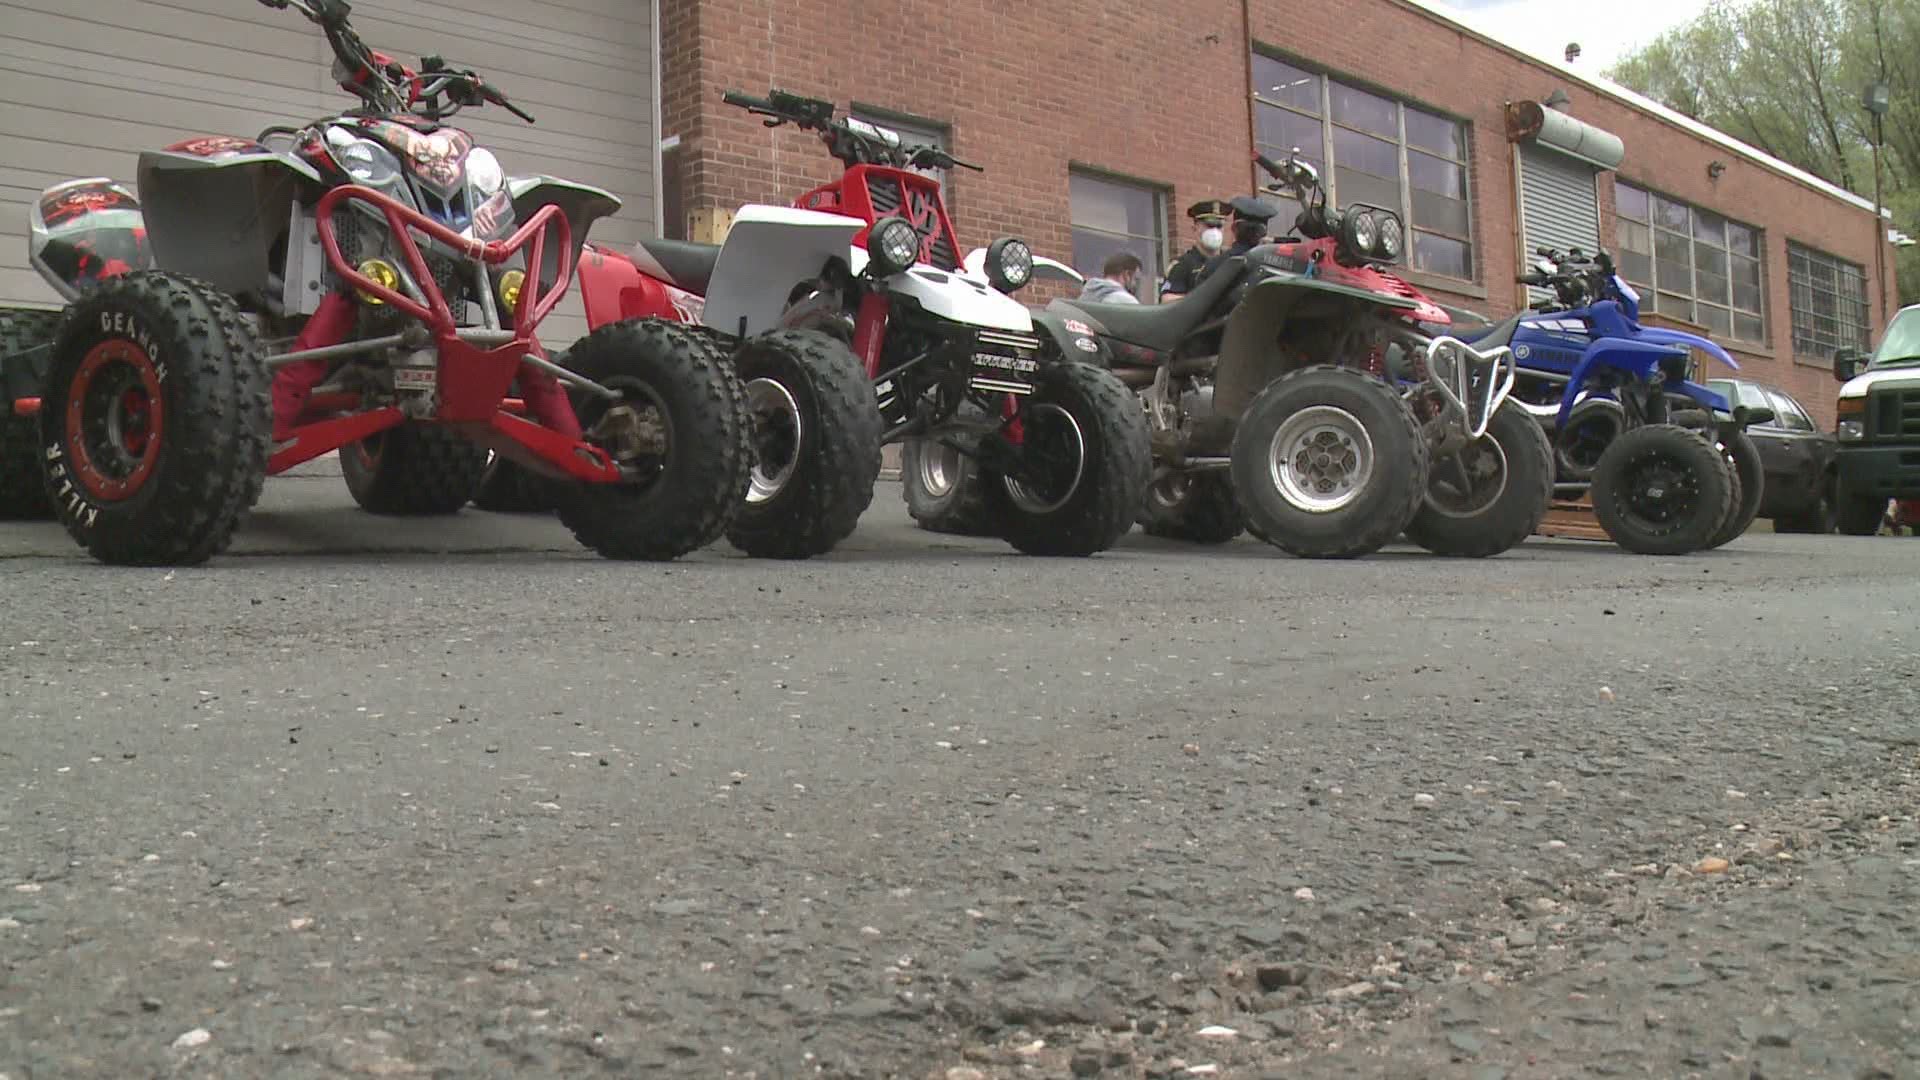 Arrests made over the weekend and bikes seized